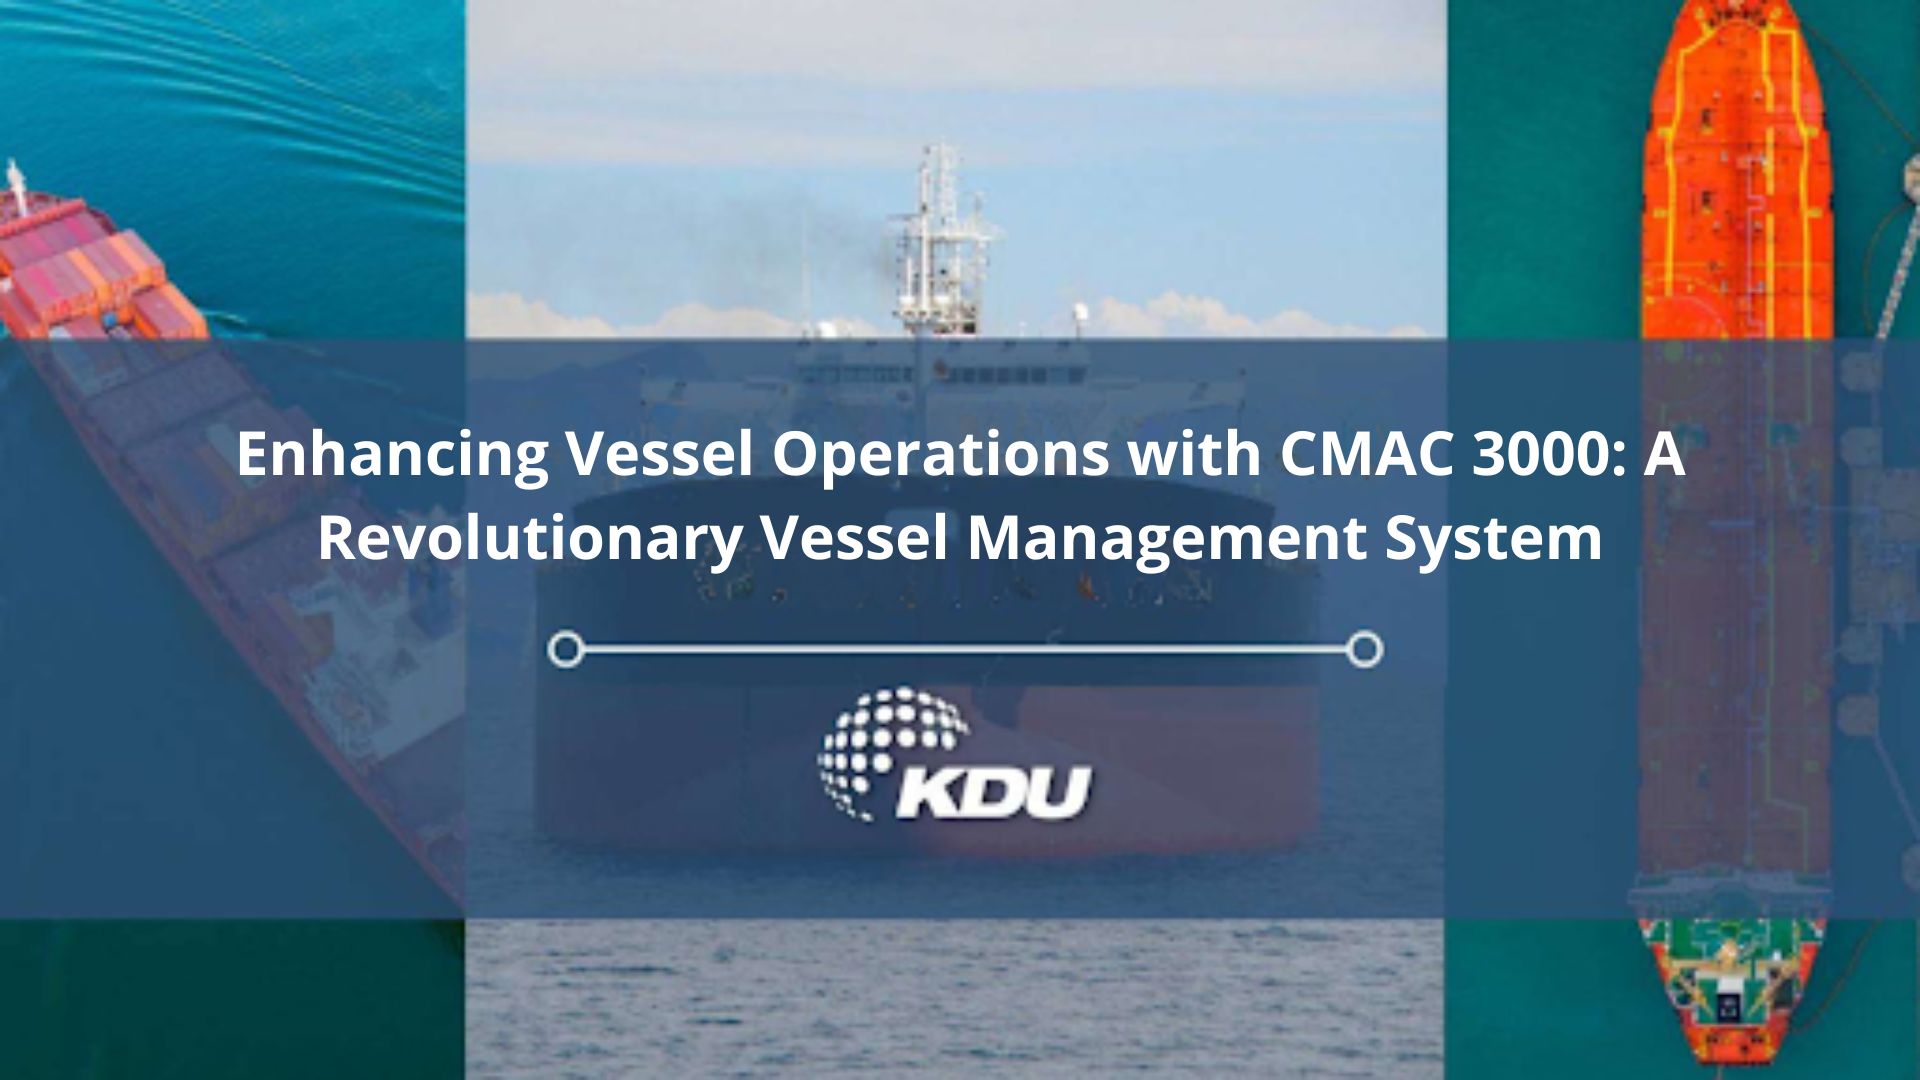 Enhancing Vessel Operations with CMAC 3000 A Revolutionary Vessel Management System